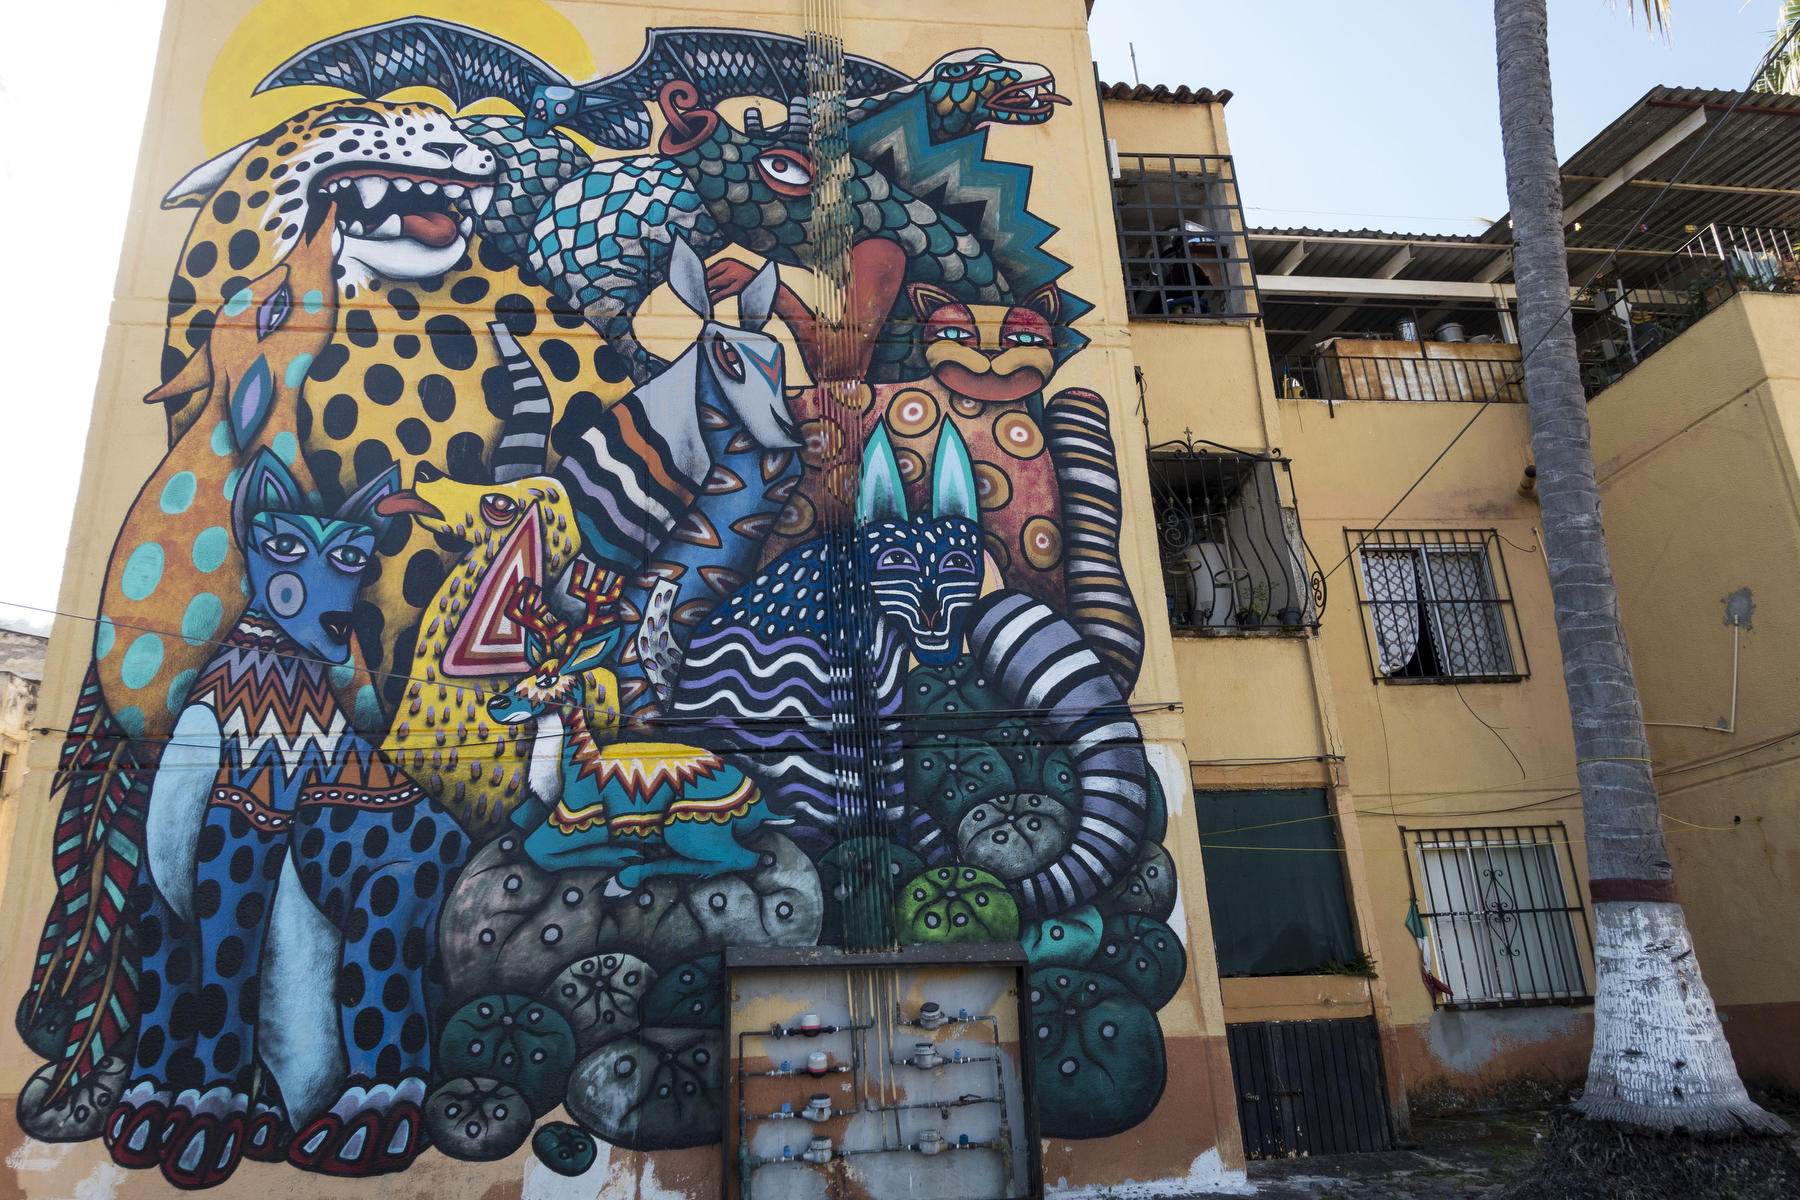 Colorful, imaginatively rendered animals , tigers, bats, snakes and others painted on a four story residential building. : PUERTO VALLARTA - Wall Art & Bicycle Tour : Viviane Moos |  Documentary Photographer